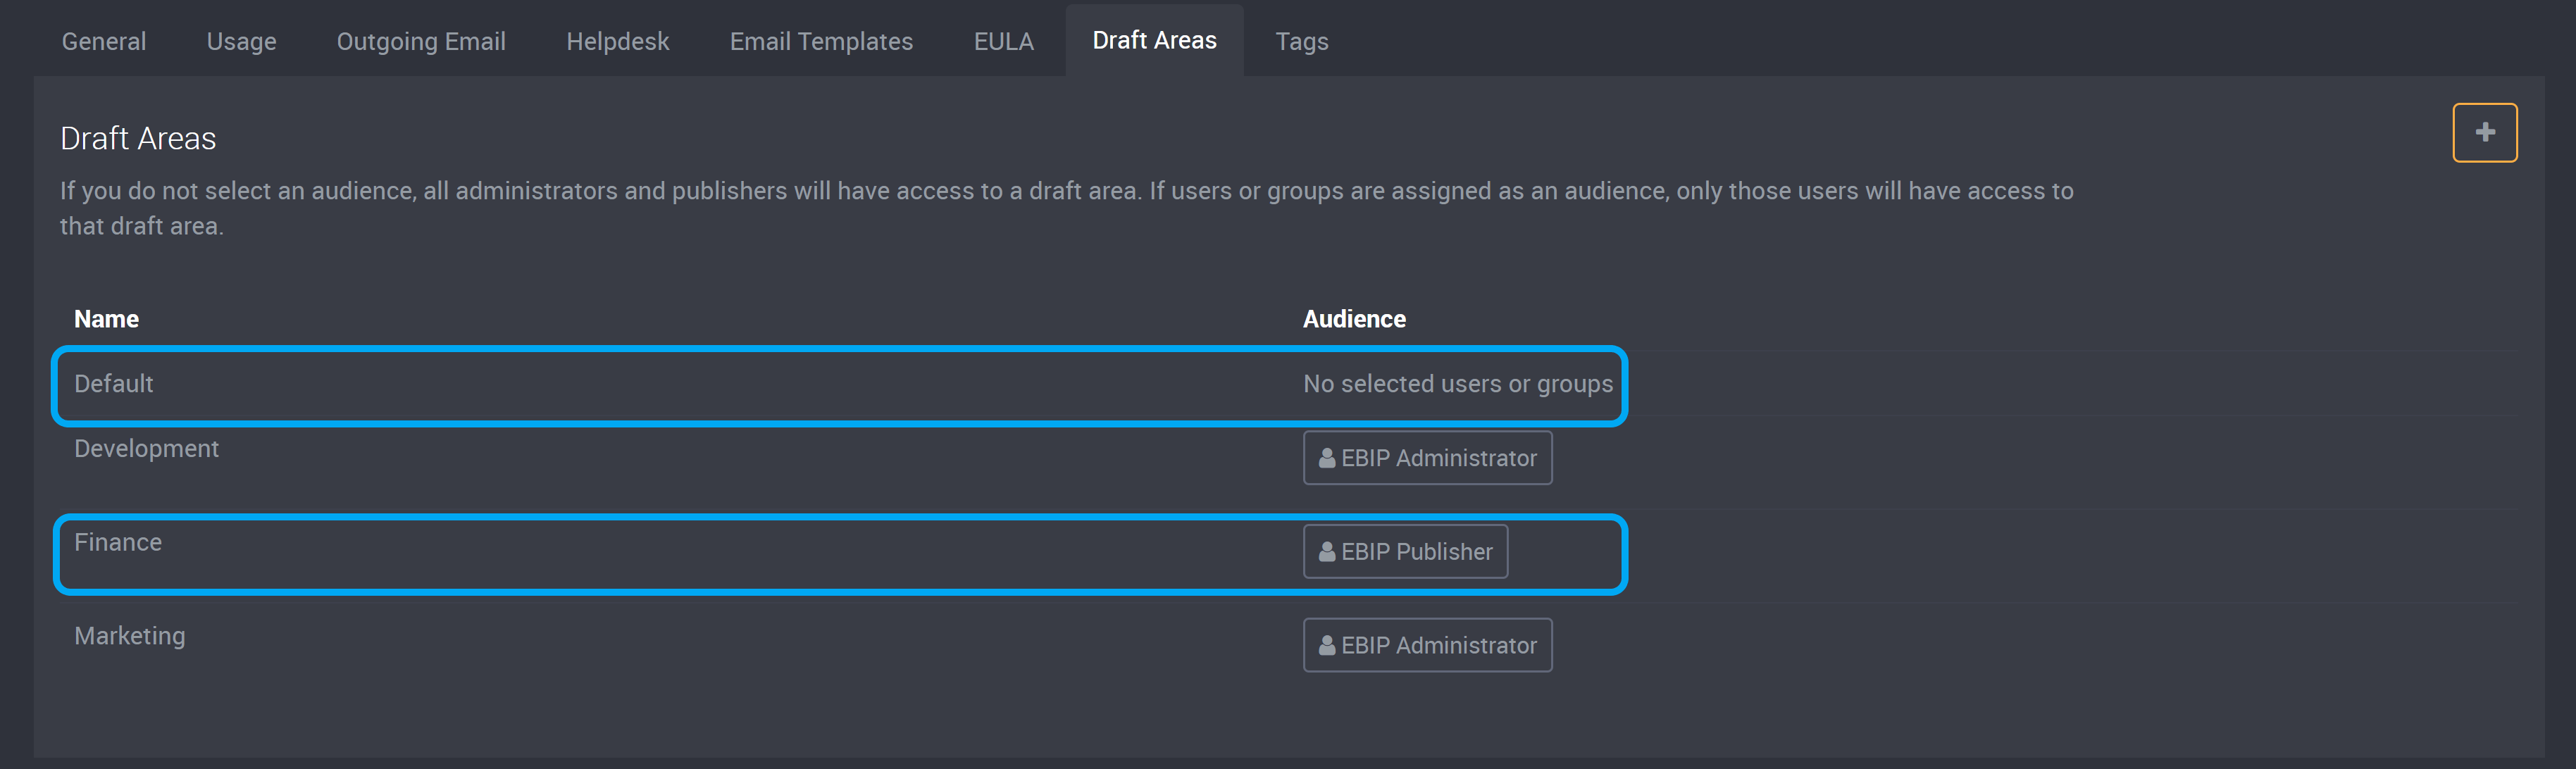 Draft areas with audiences